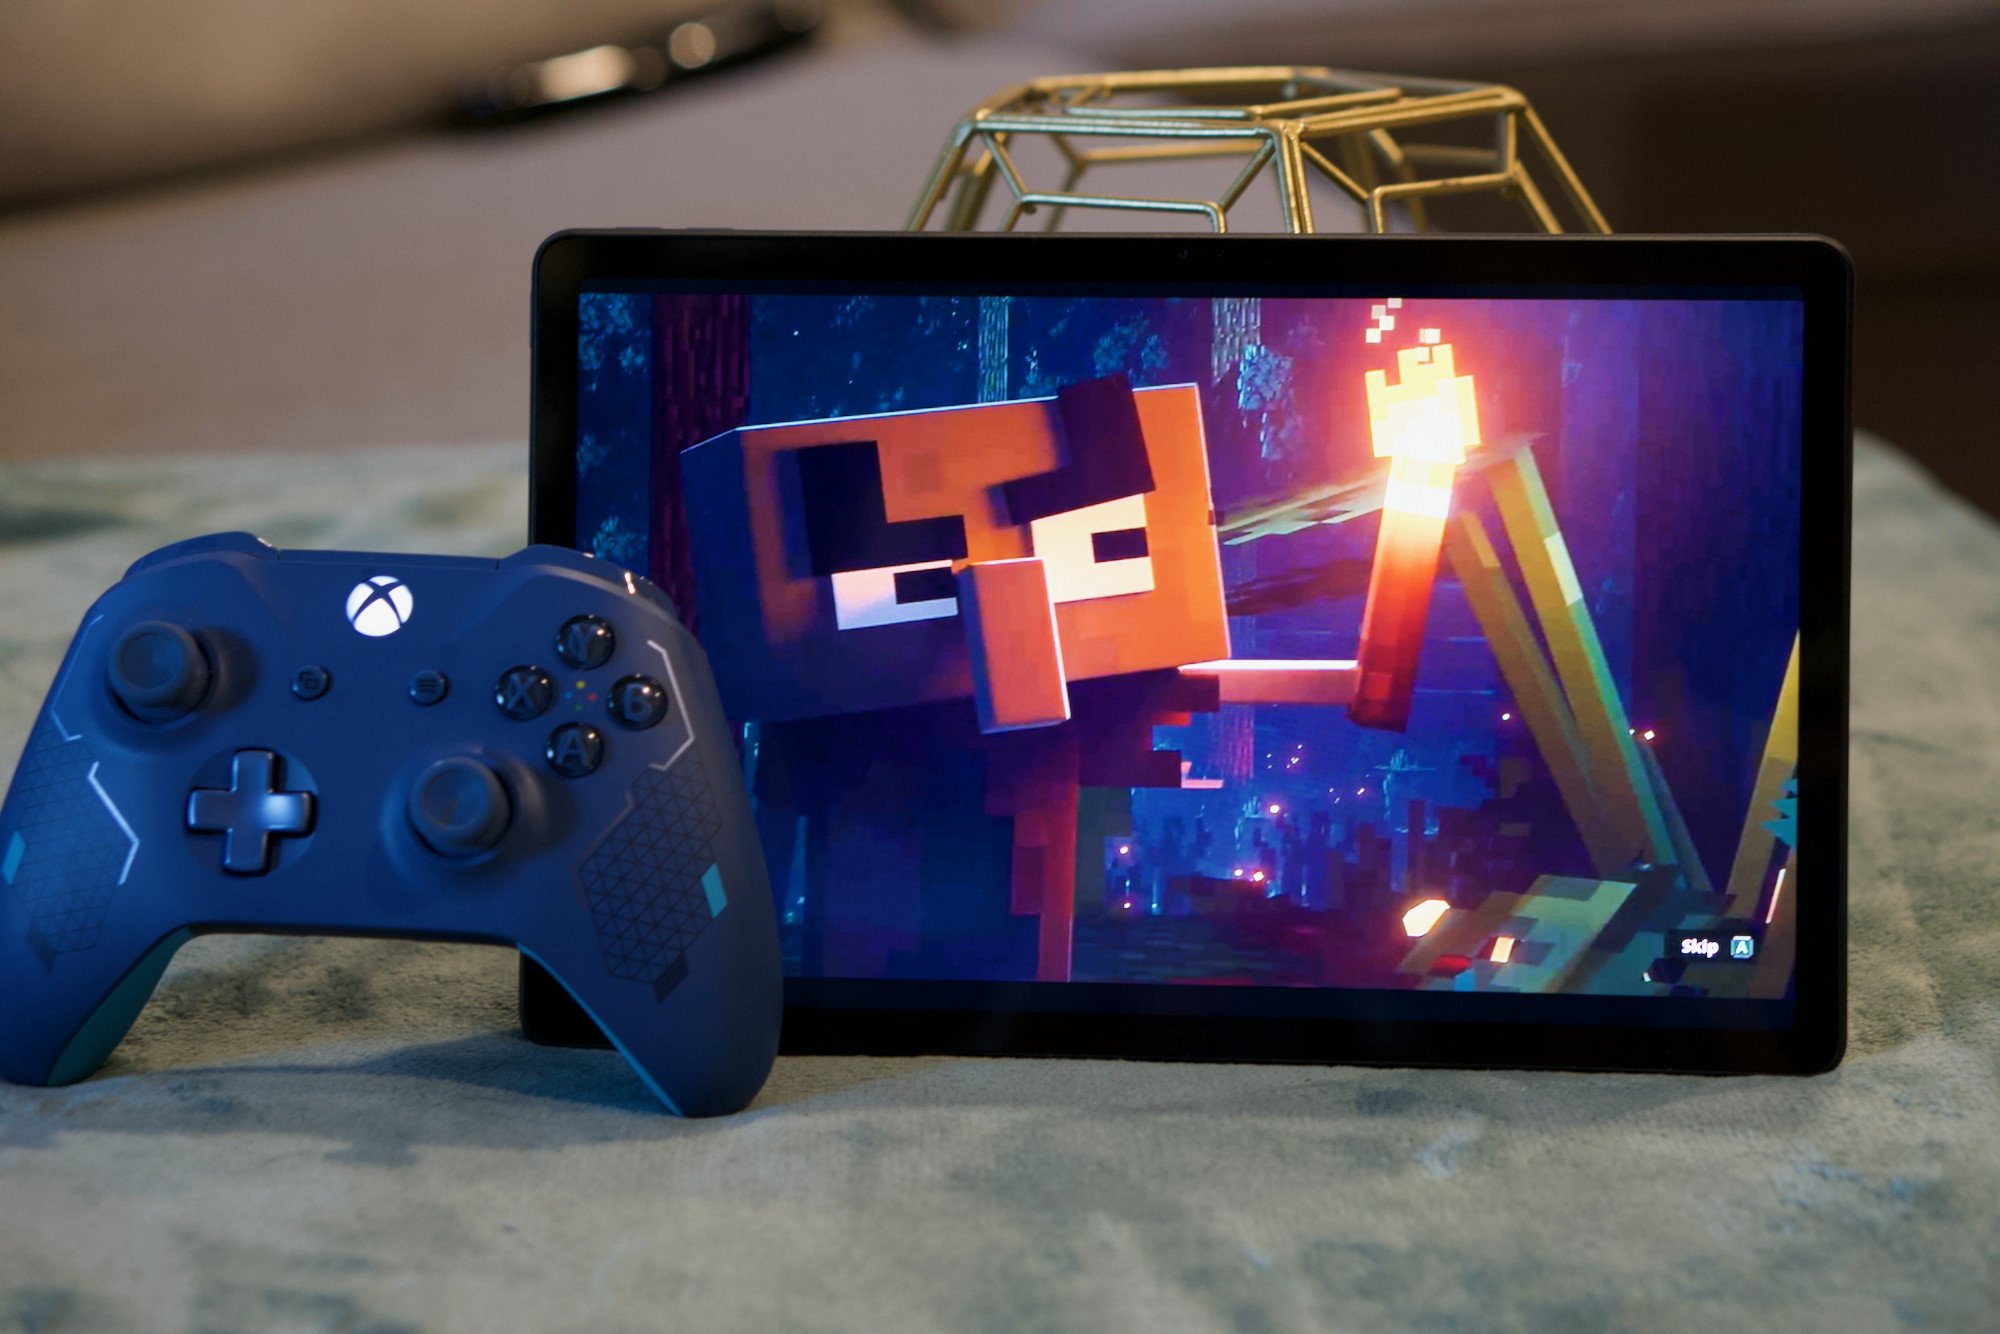 Minecraft Dungeons on the Lenovo Tab P11 Plus with an Xbox Wireless Controller